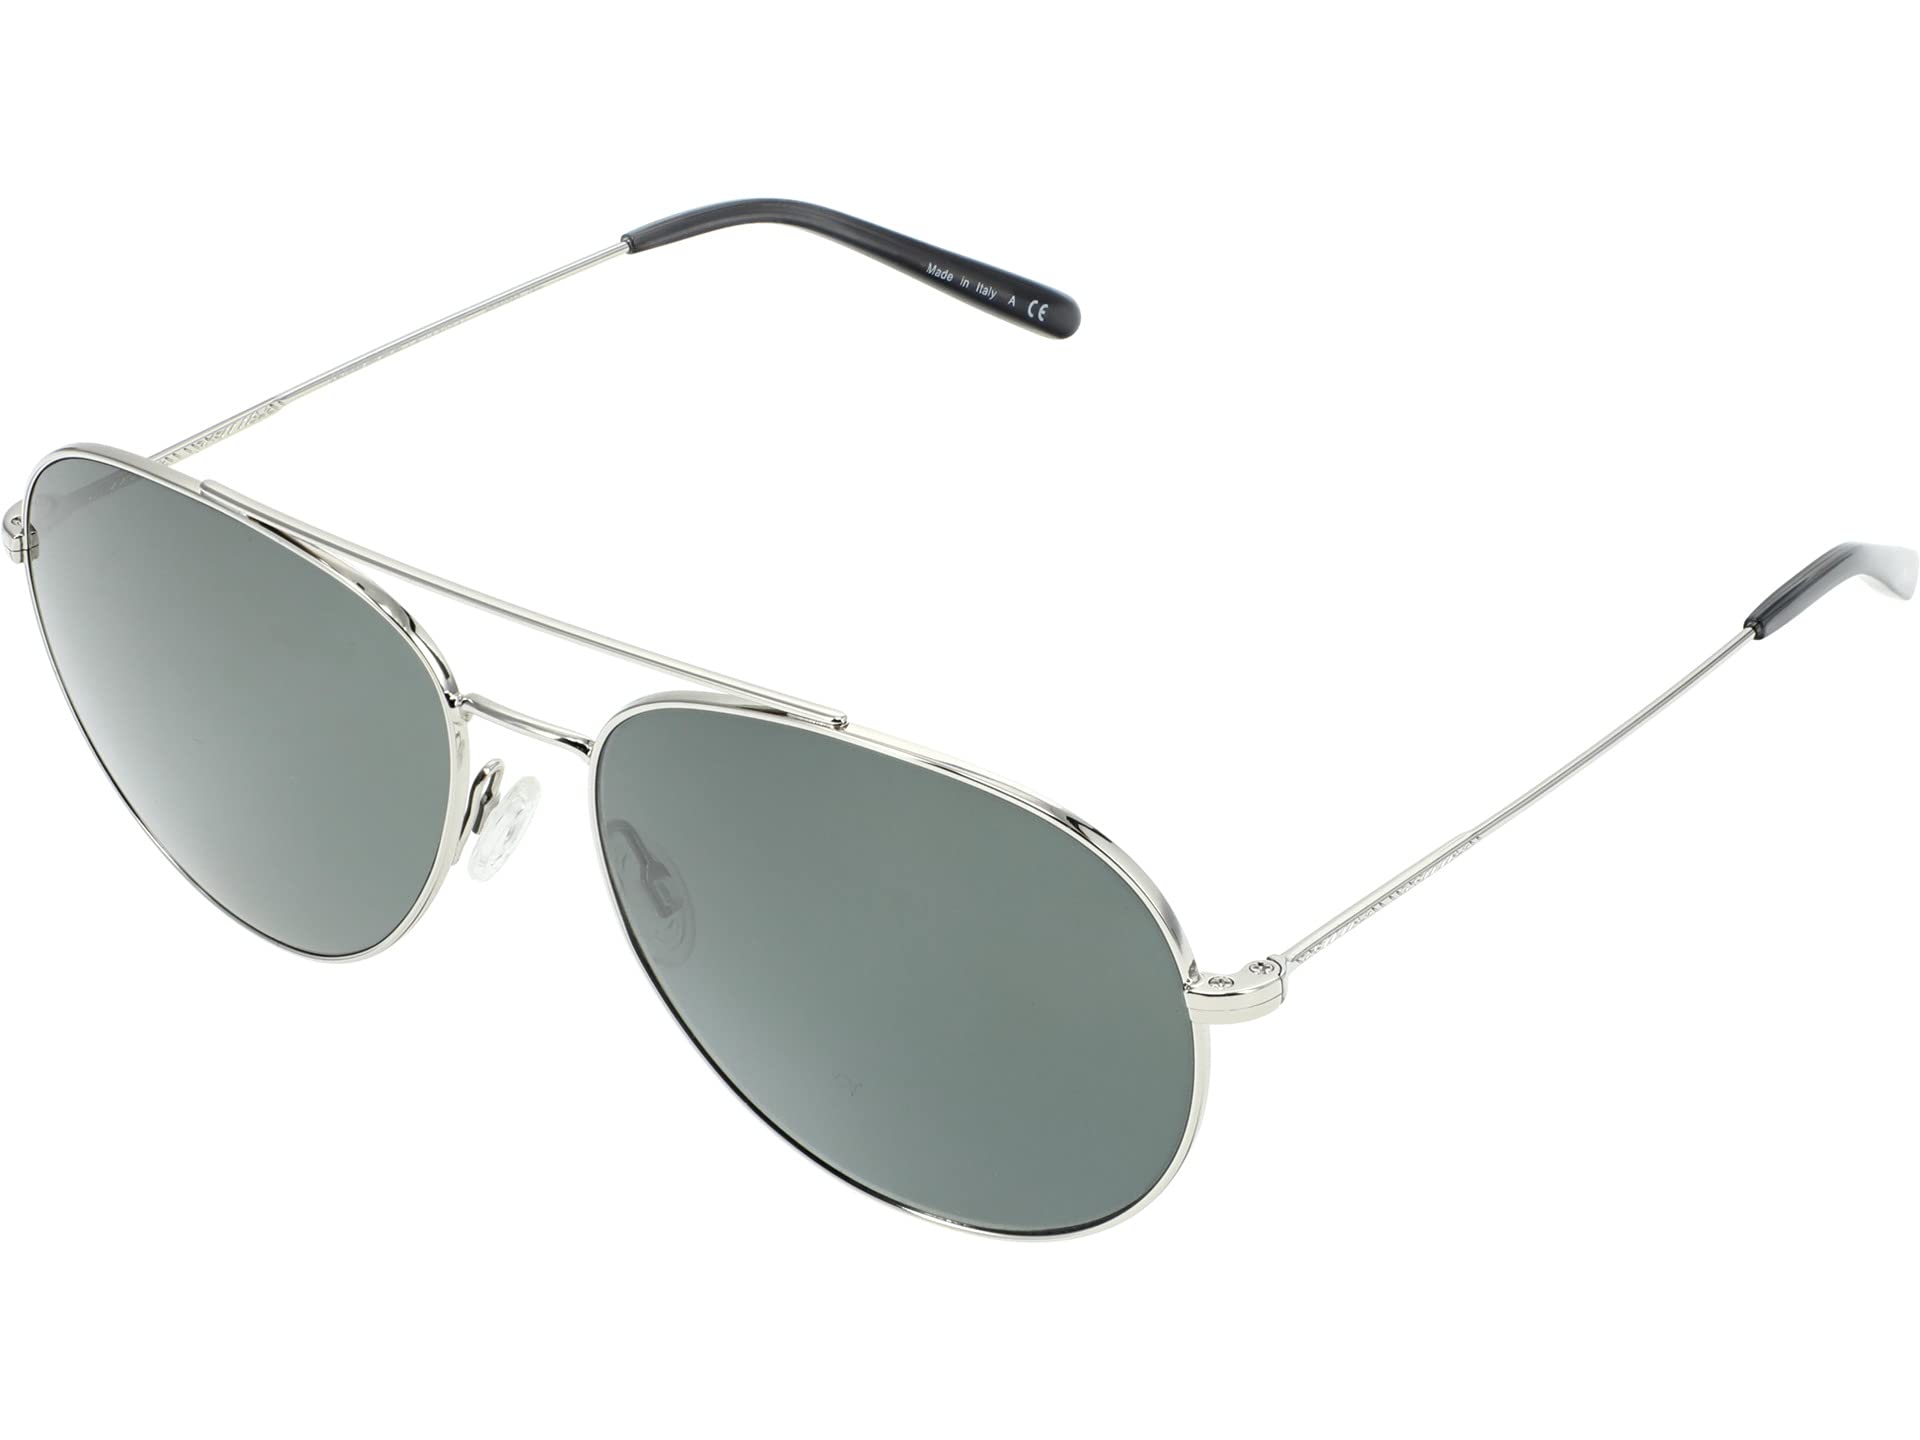 Airdale Oliver Peoples